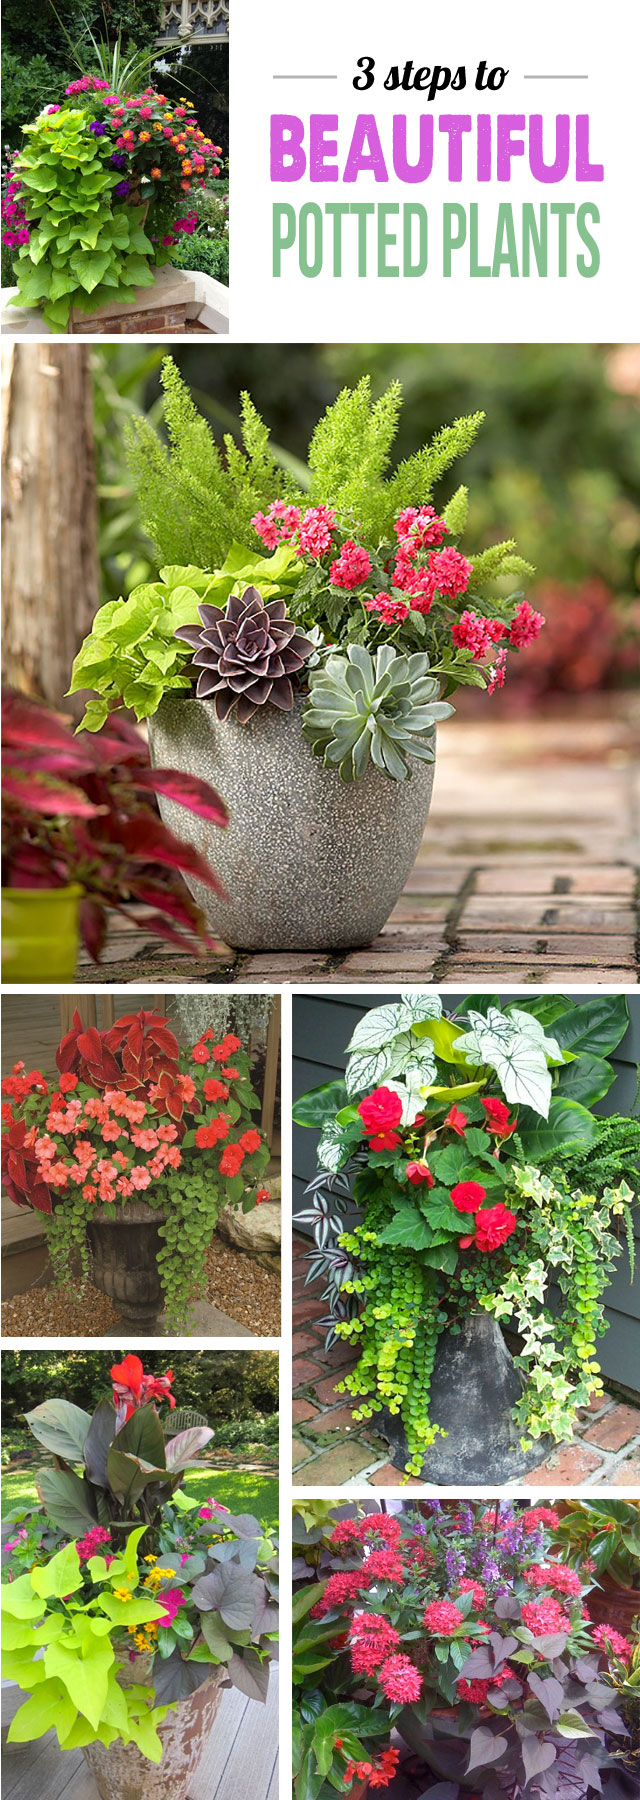 Great tips for making stunning potted plant arrangements - can't wait to add some color to my deck!